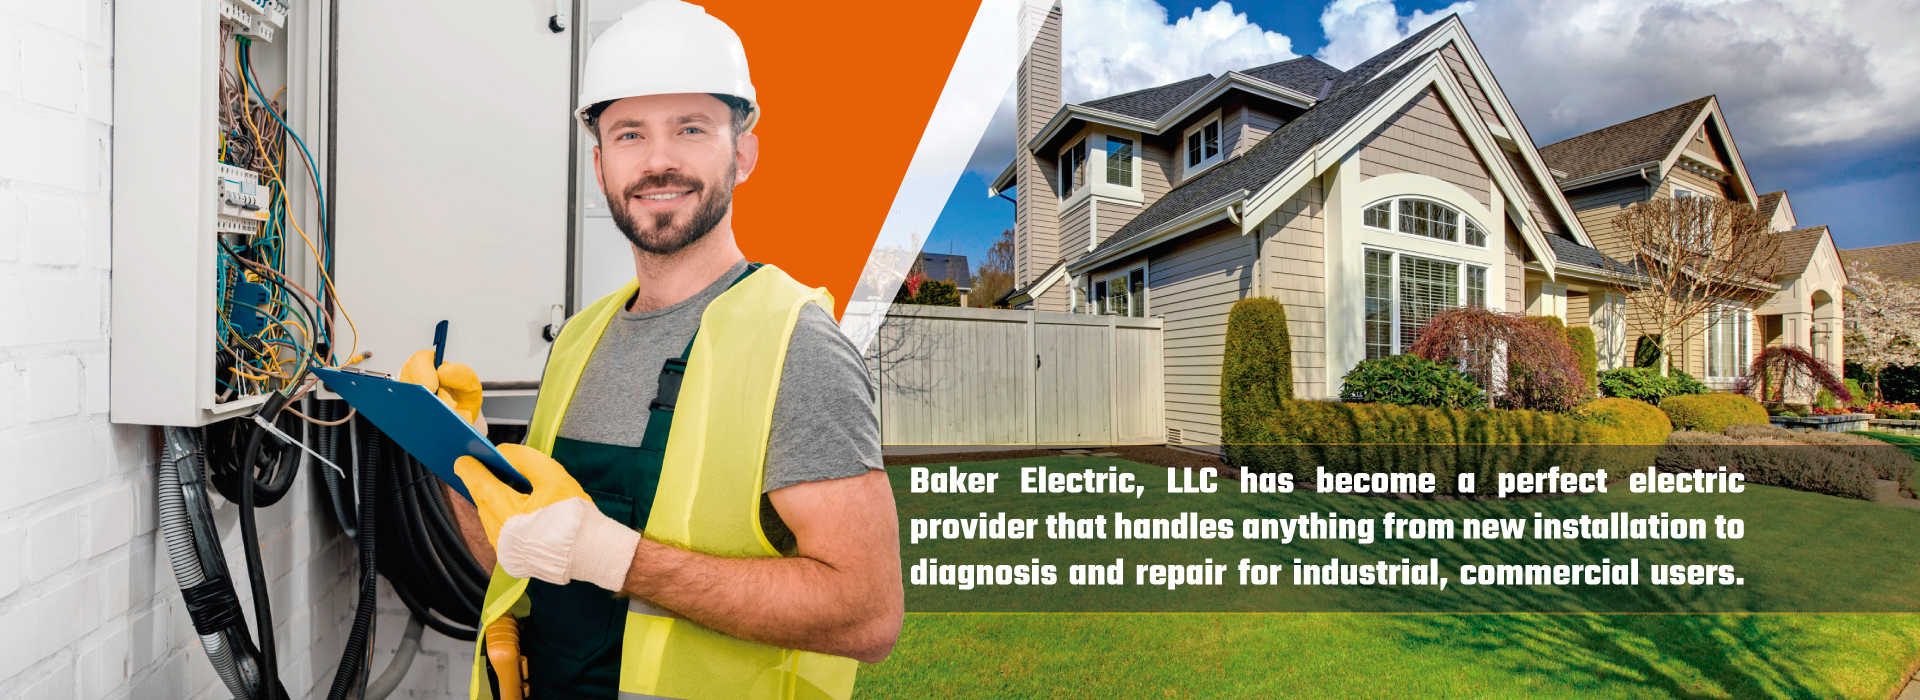 Baker Electric has become a perfect electric provider